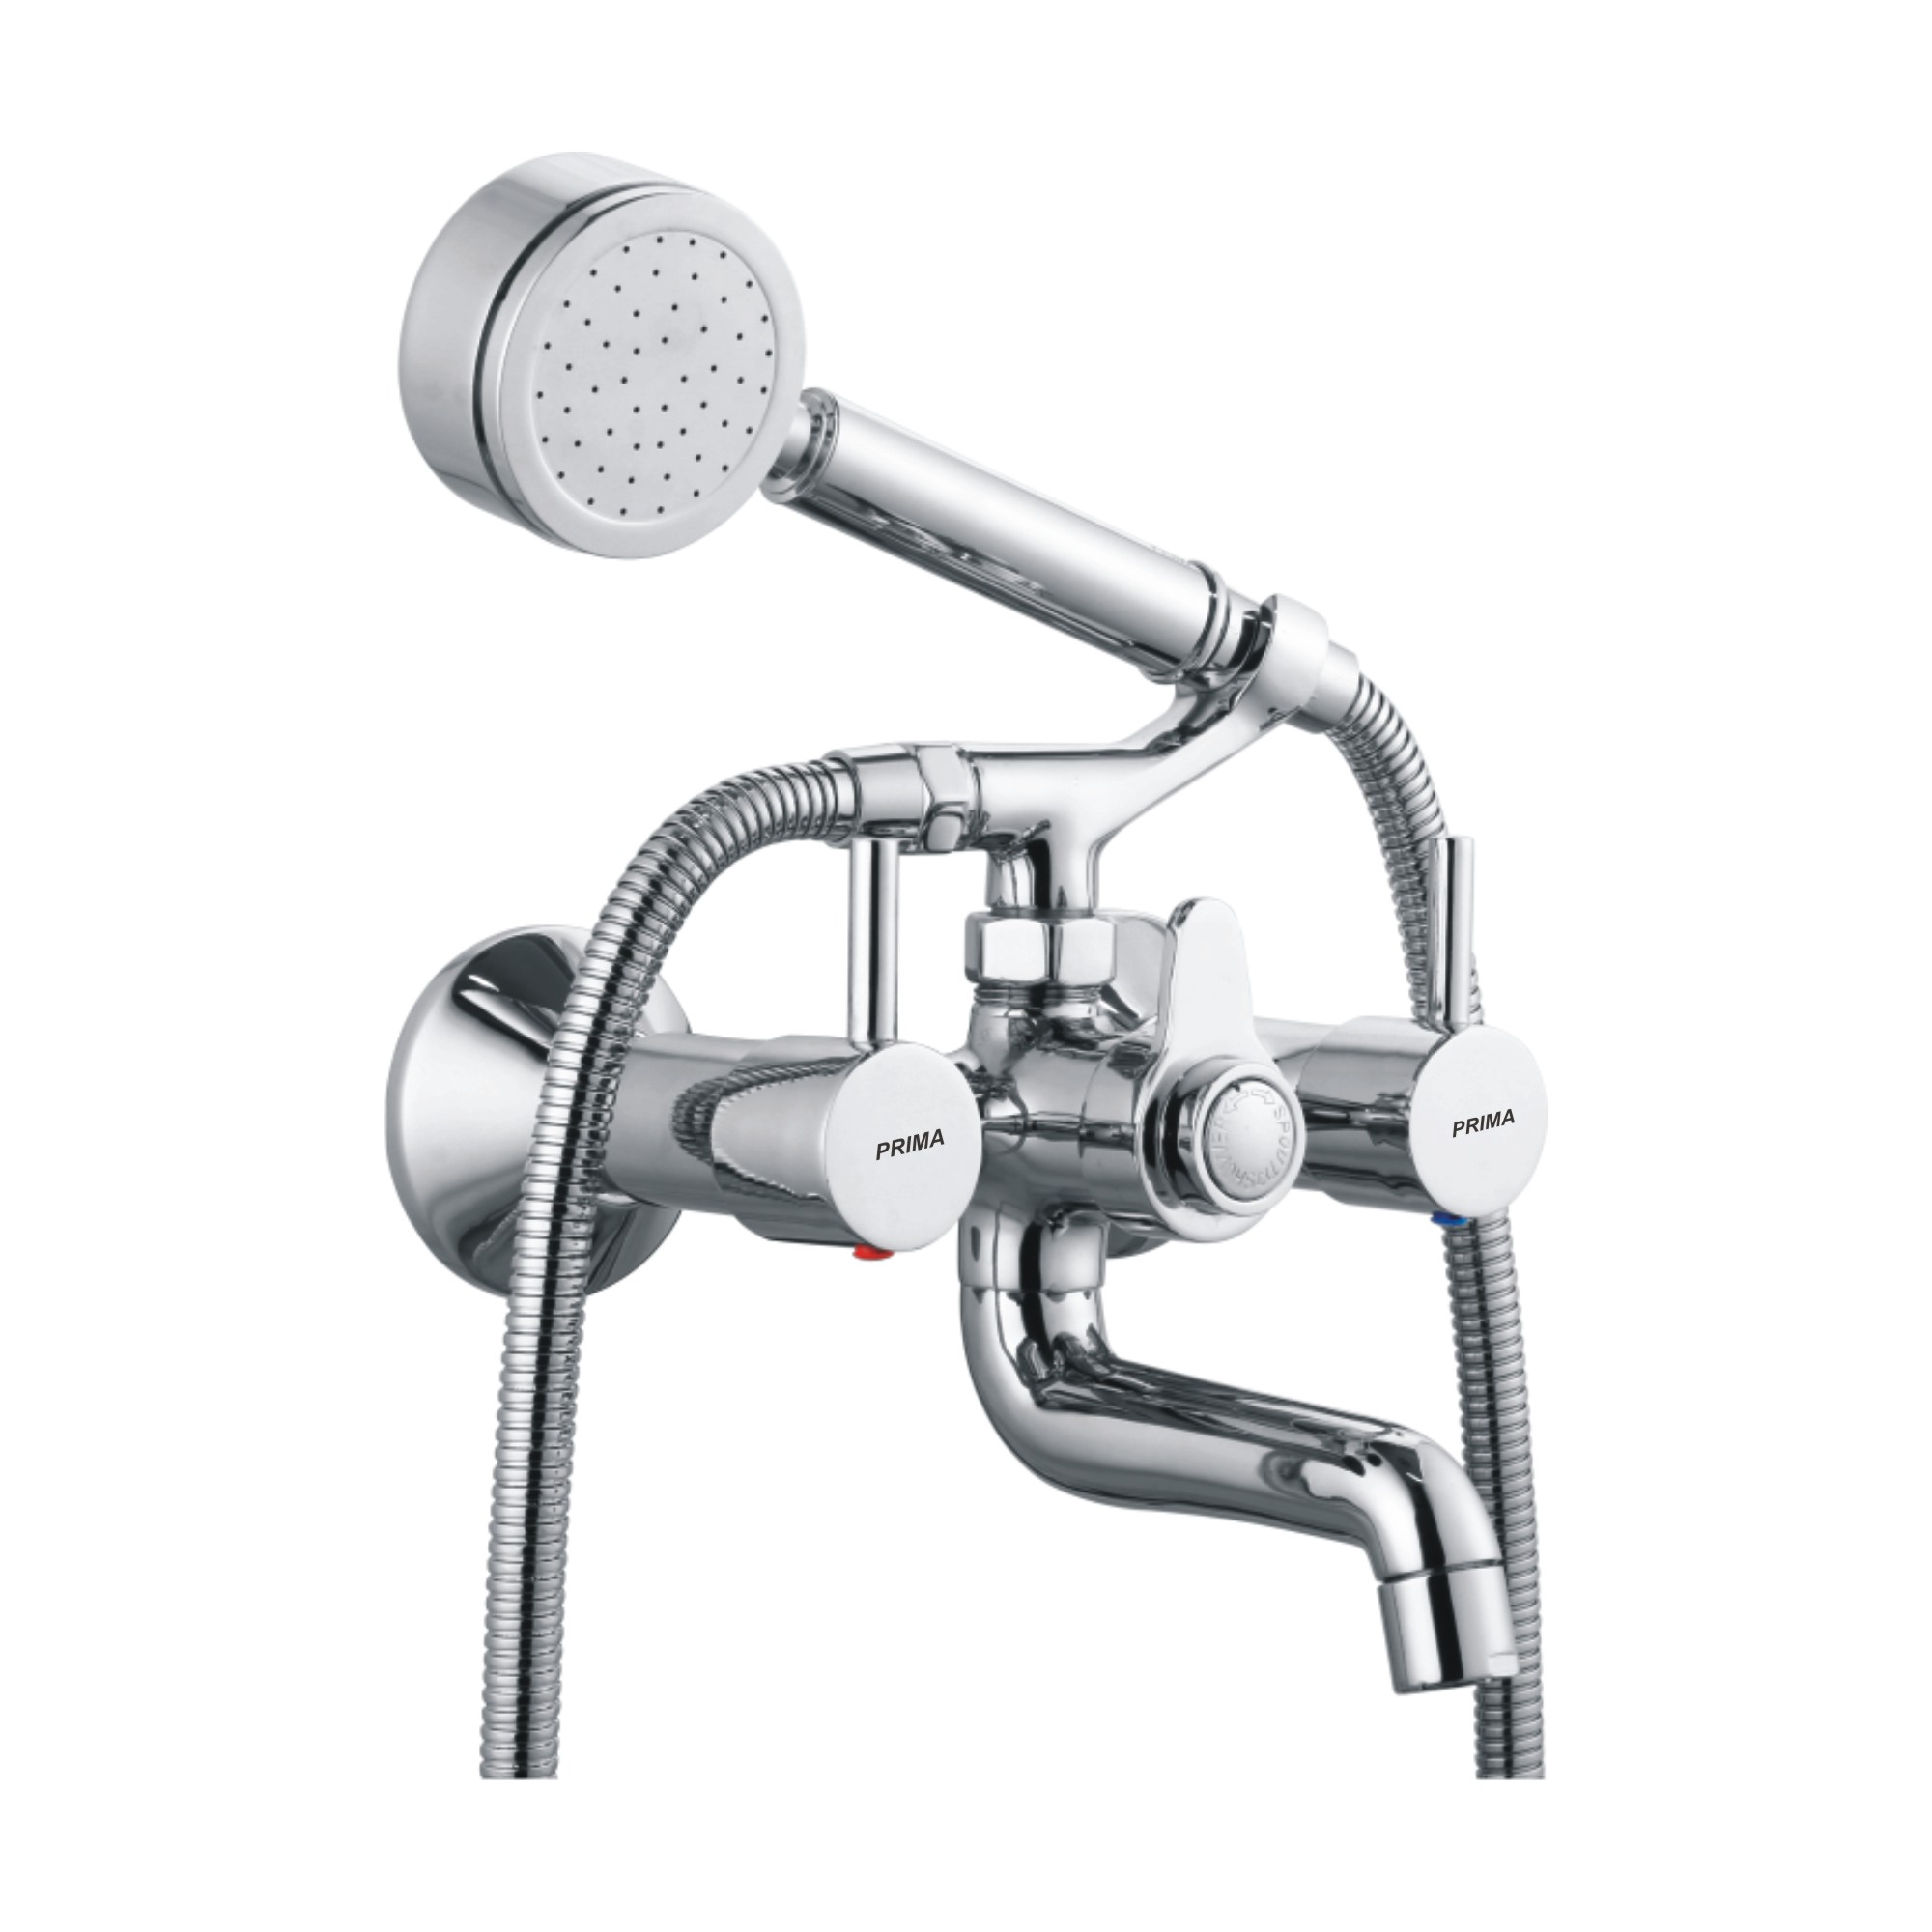 C.P Wall mixer Telephonic with Crutch 